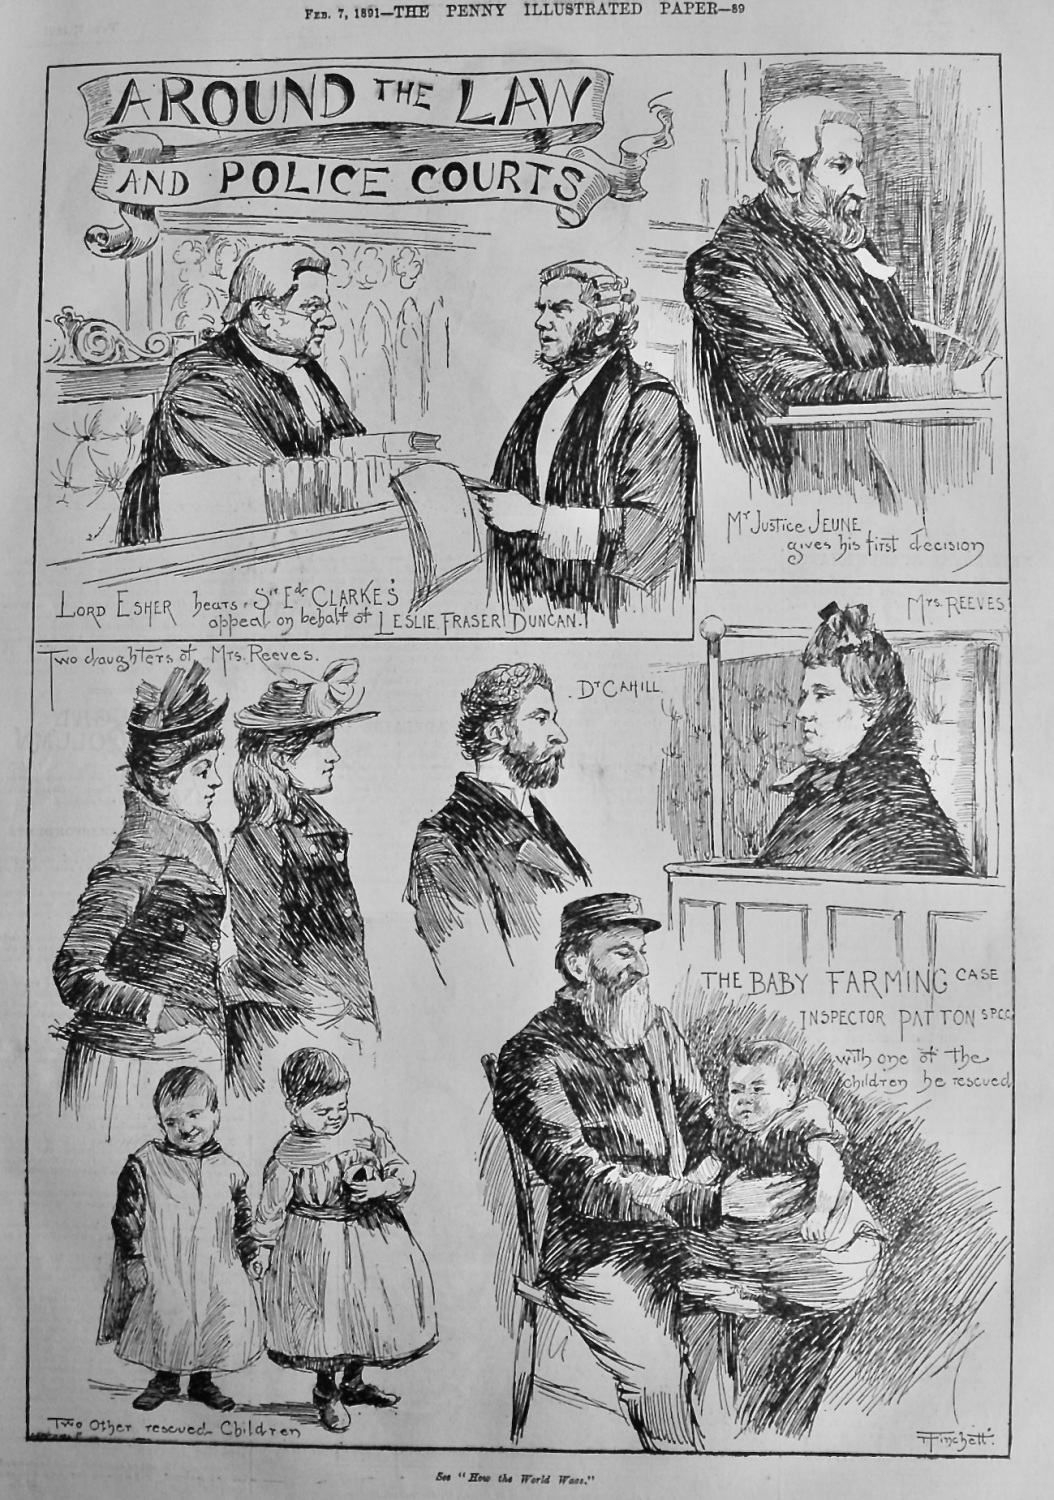 Around the Law and Police Courts.   Feb. 1891.